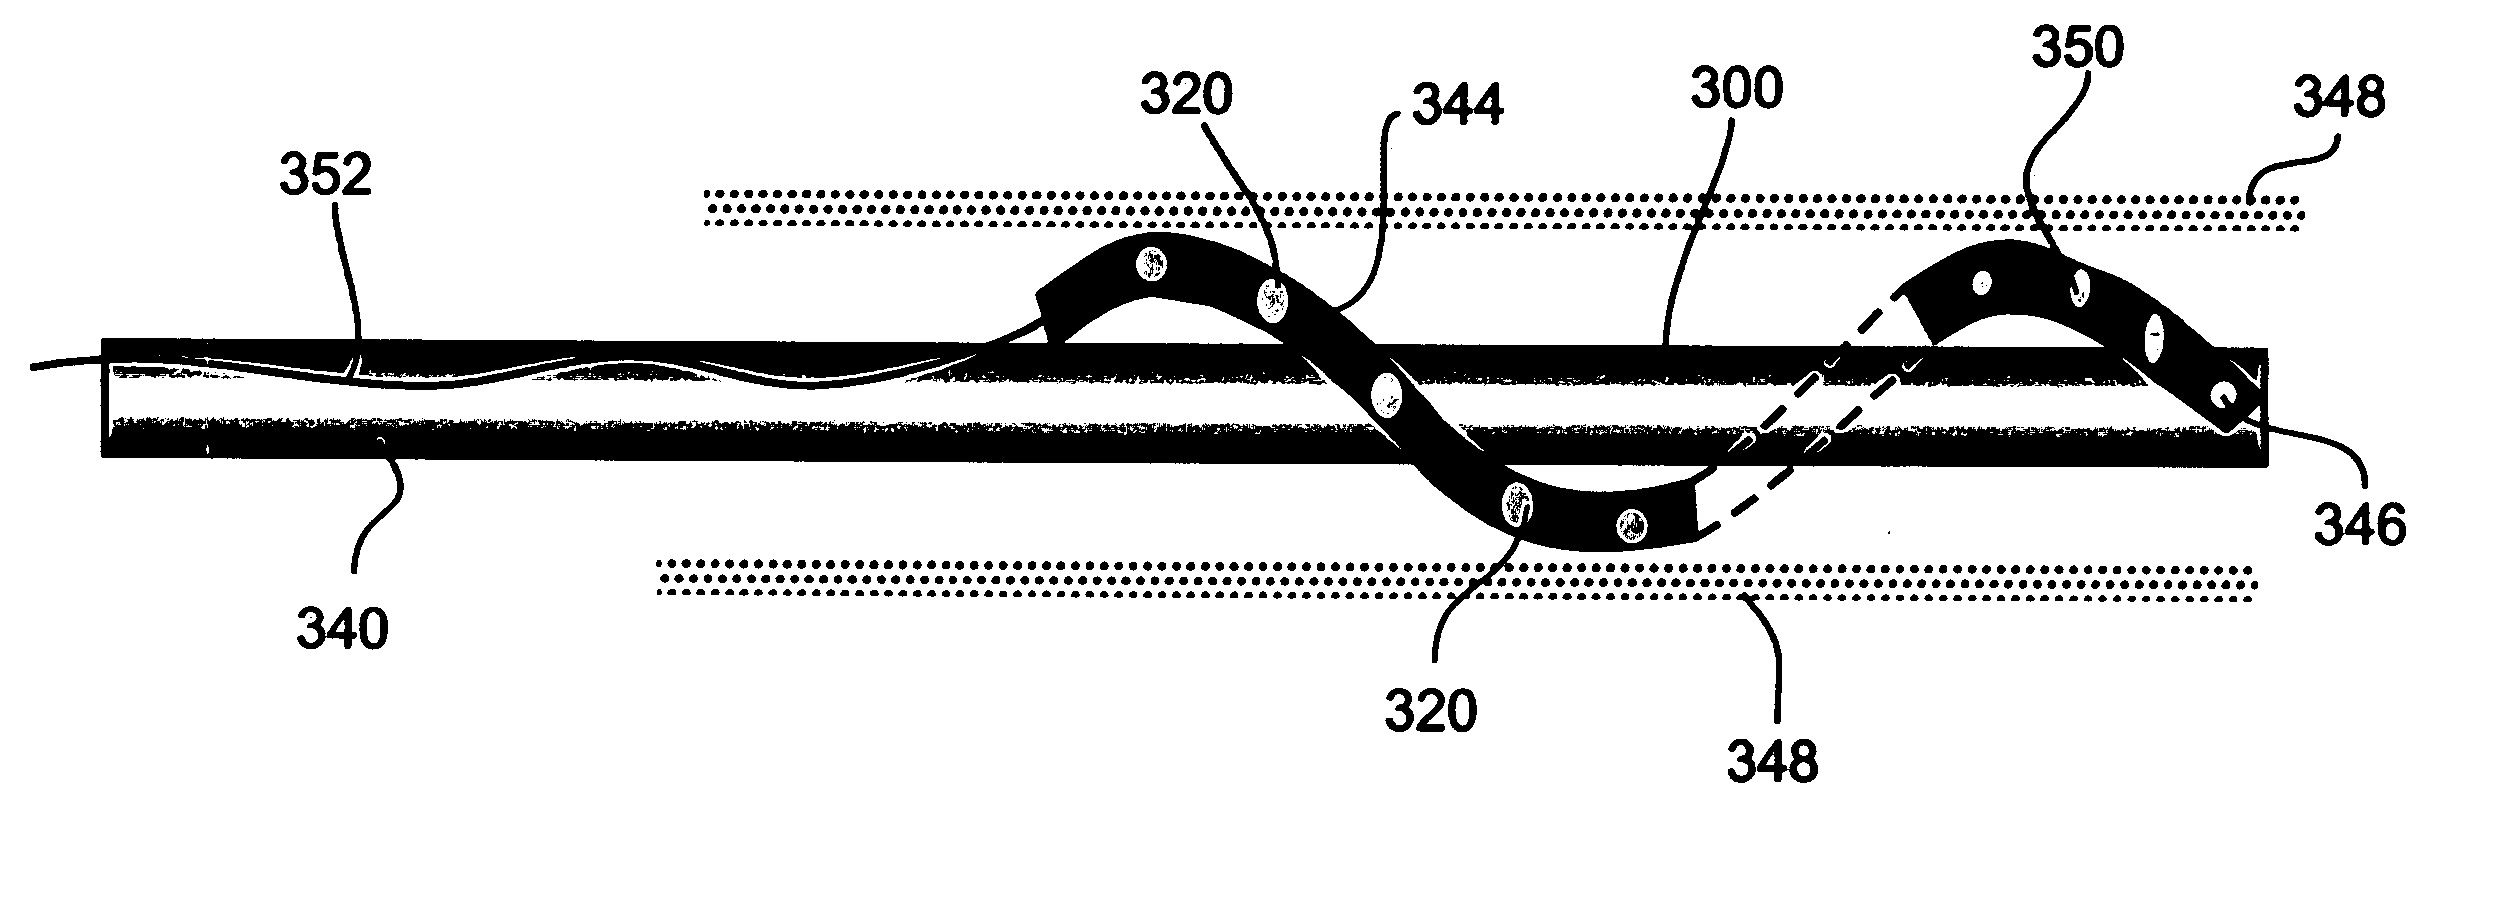 Thermal sensing device for thermal mapping of a body conduit